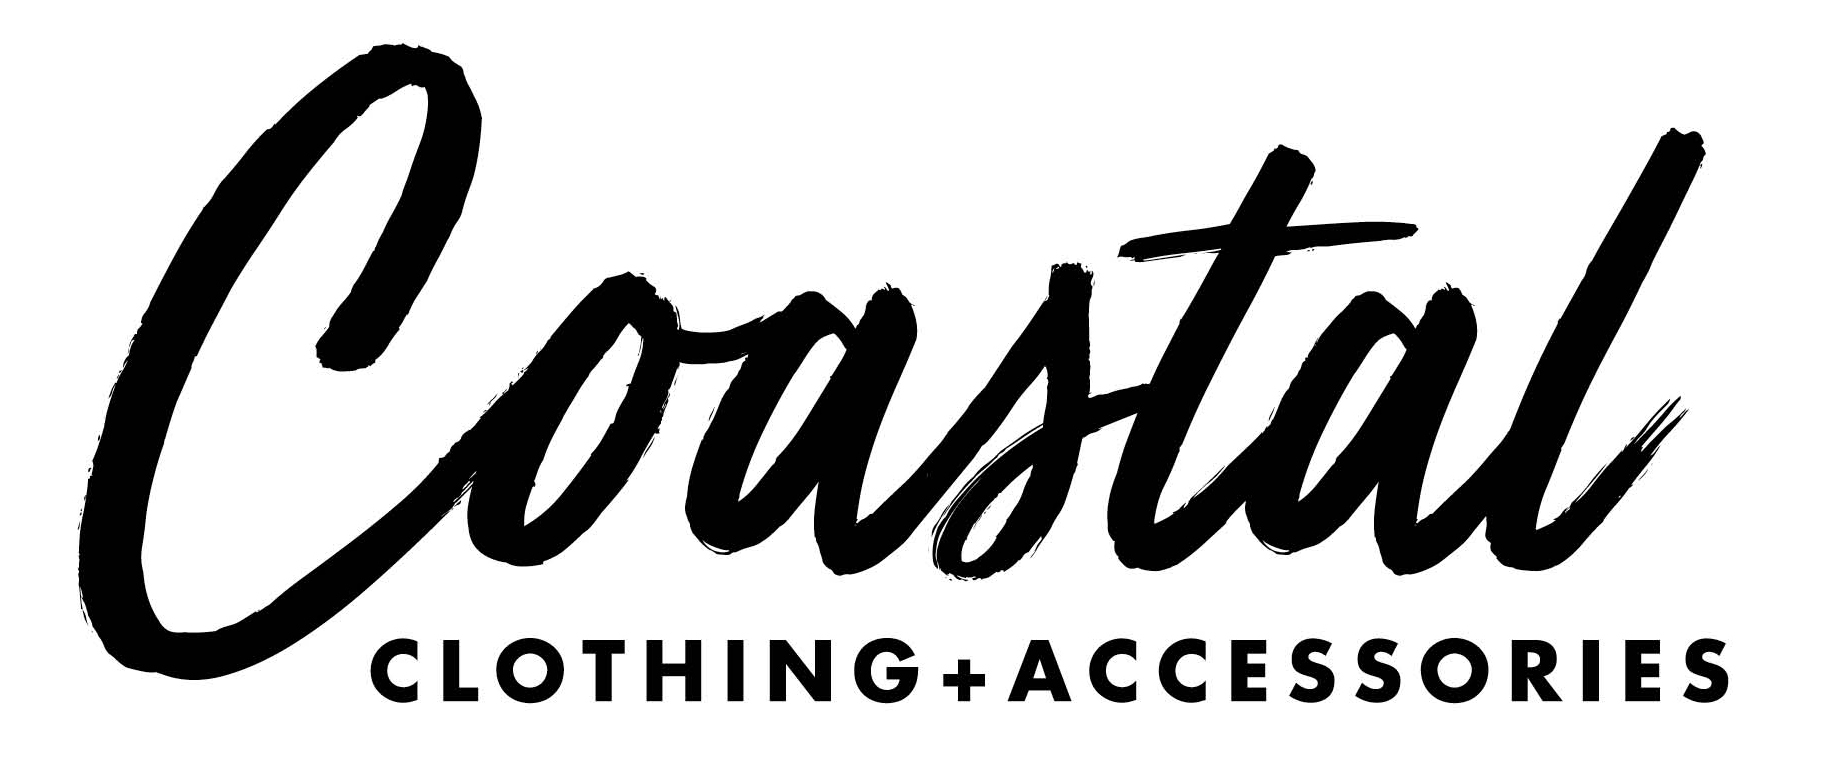 logo for Coastal clothing and accessories store